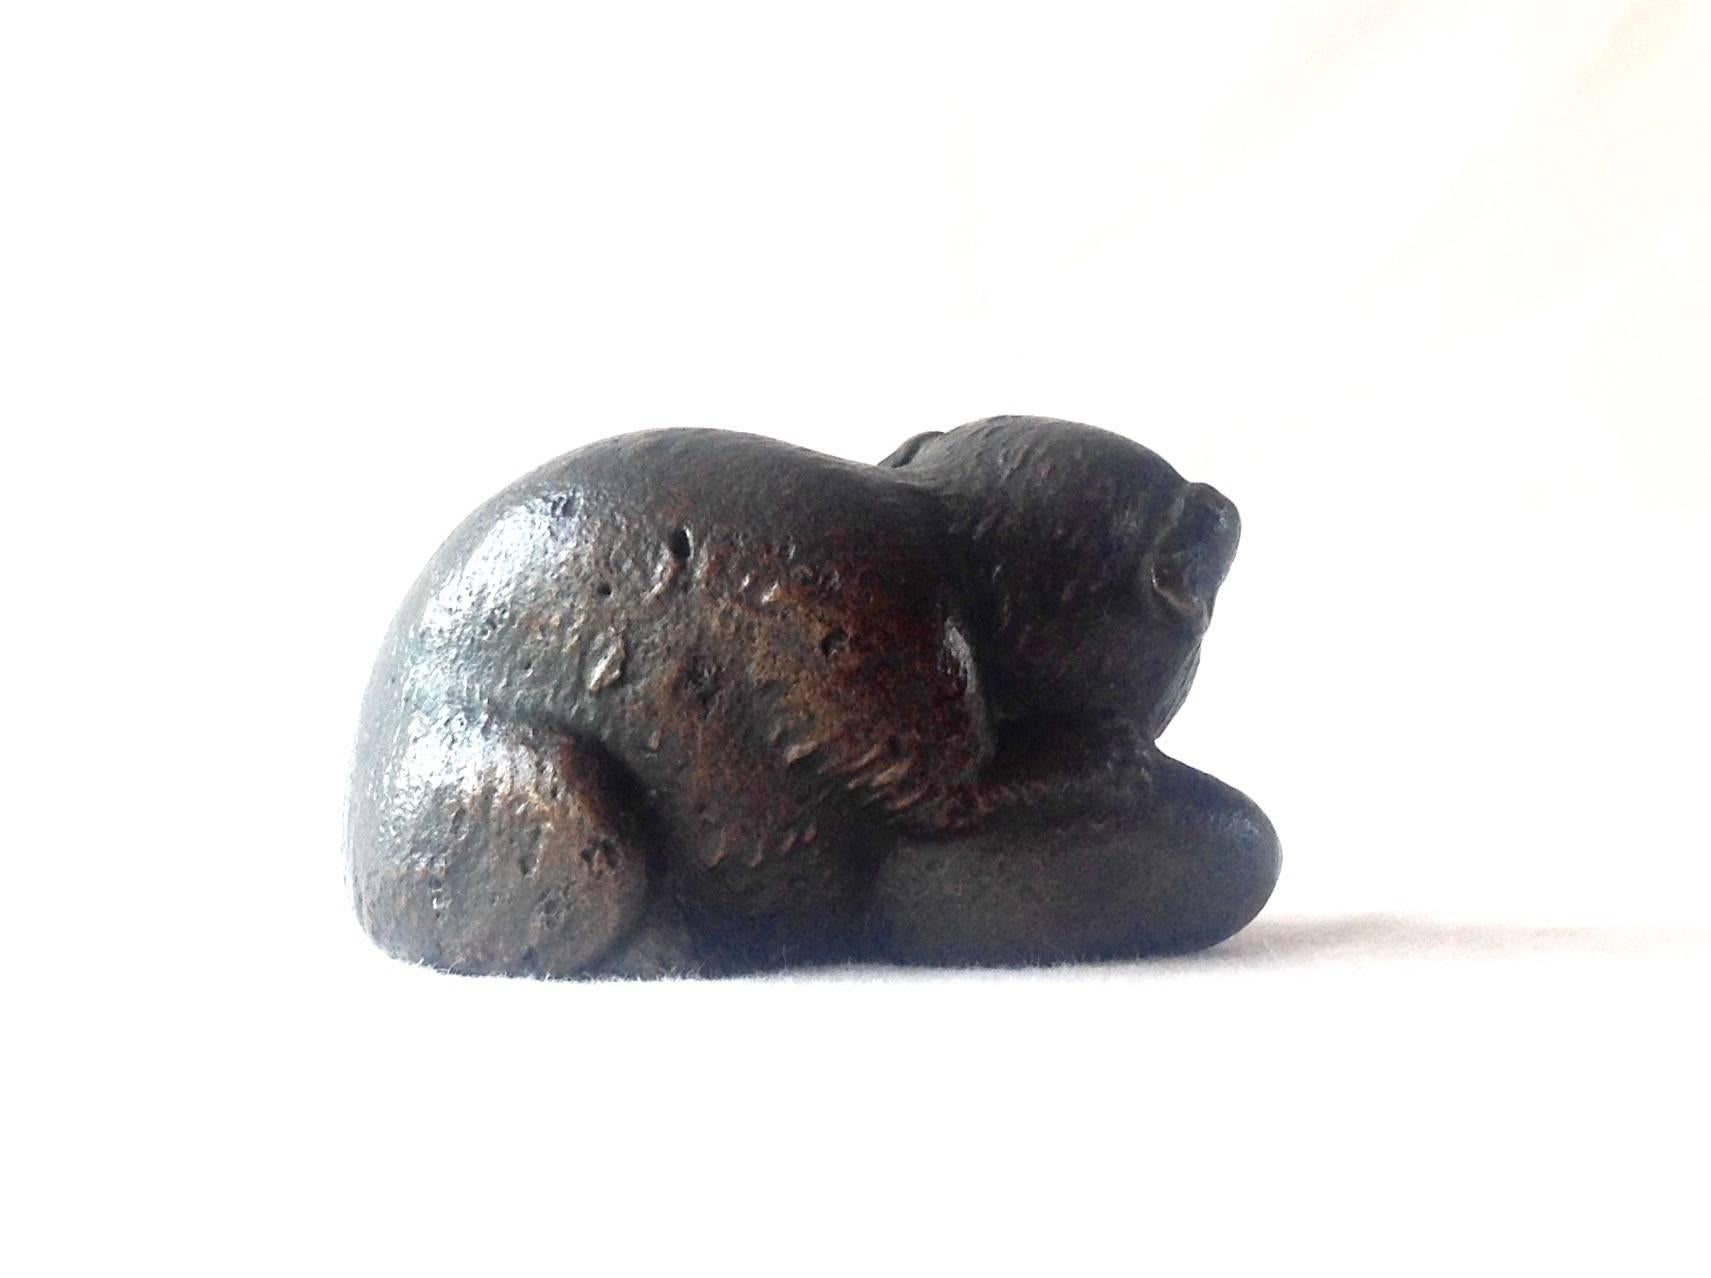 Signed Tiffany Studios/New York bronze figure paperweight, original patina, measures 1.5 inches high and 2.5 inches wide.